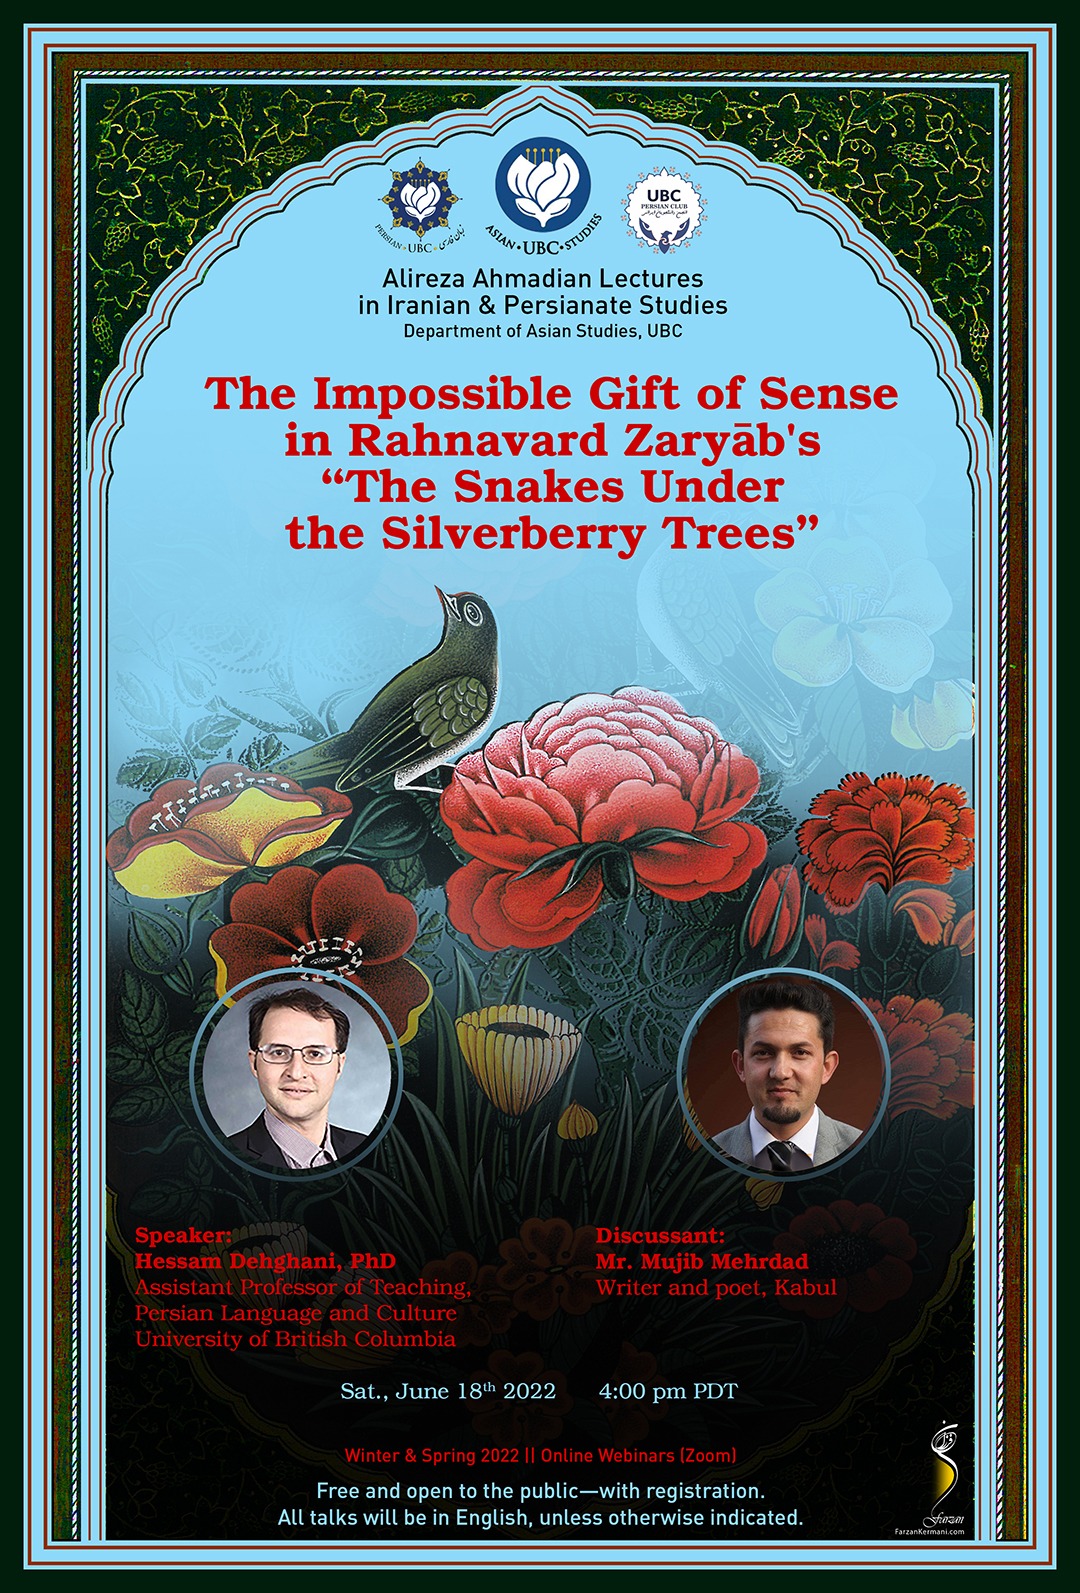 The Impossible Gift of Sense in Rahnavard Zaryāb’s “The Snakes Under the Silverberry Trees”